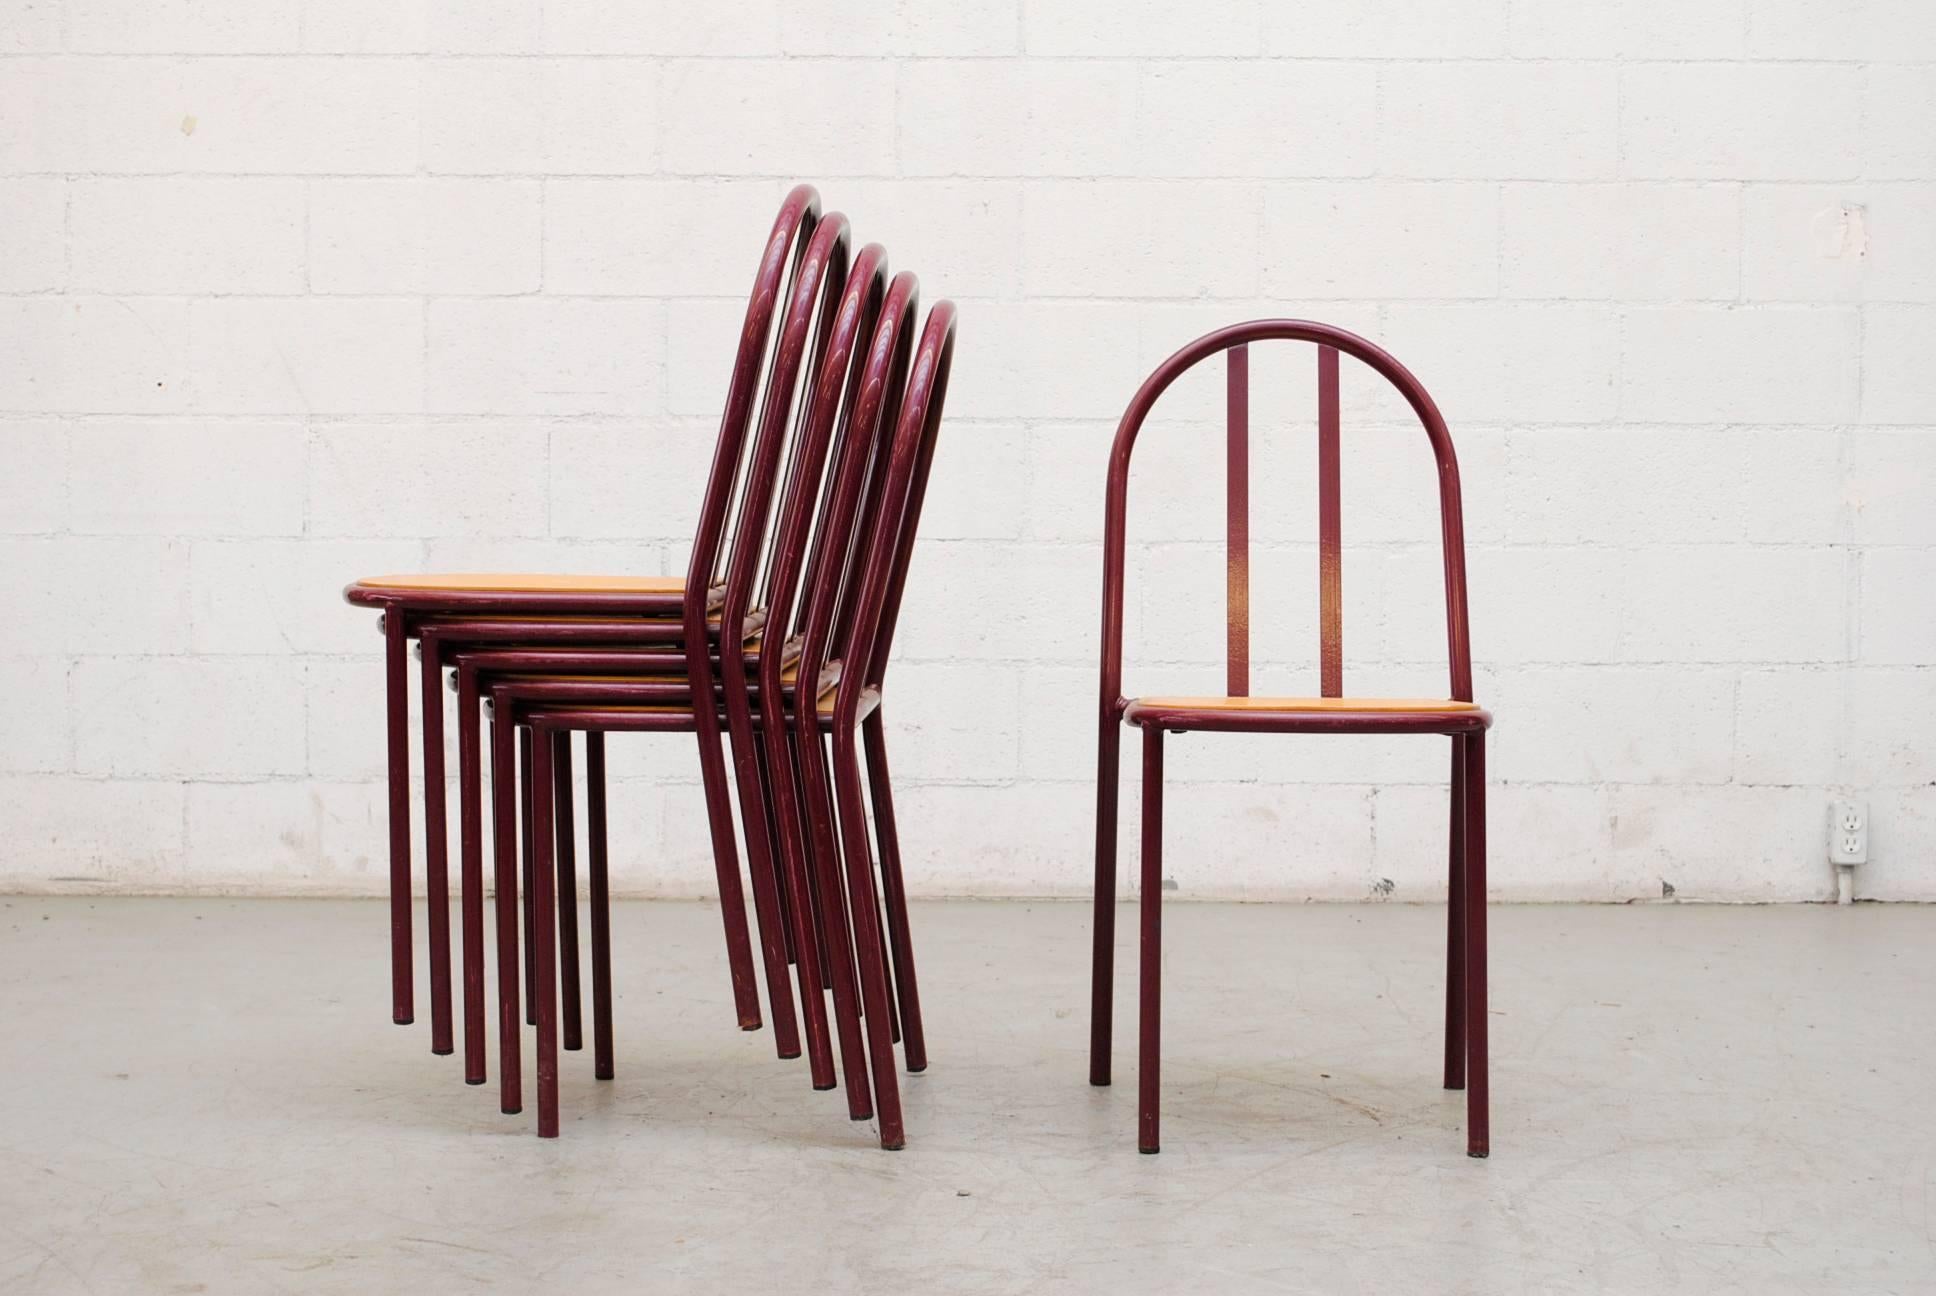 Thonet inspired maroon enameled metal frame with inset birchwood seats all in good original condition with wear consistent with their age and usage.